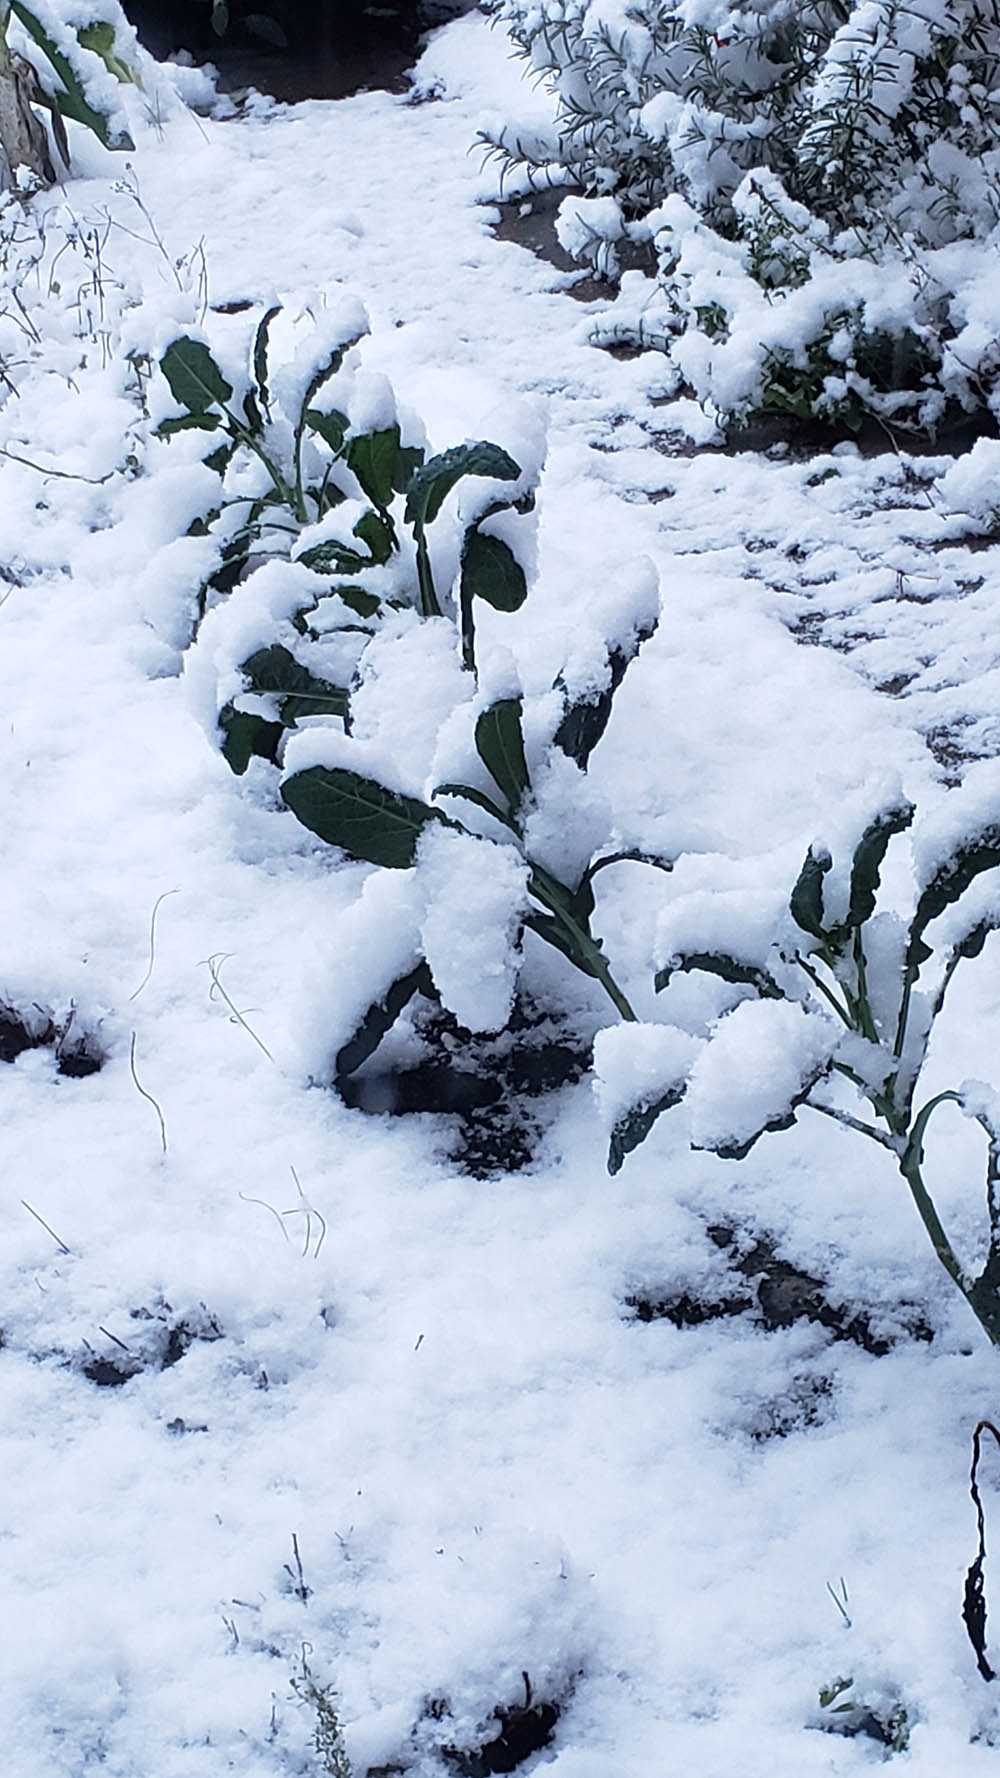 Snow covered small kale plants.